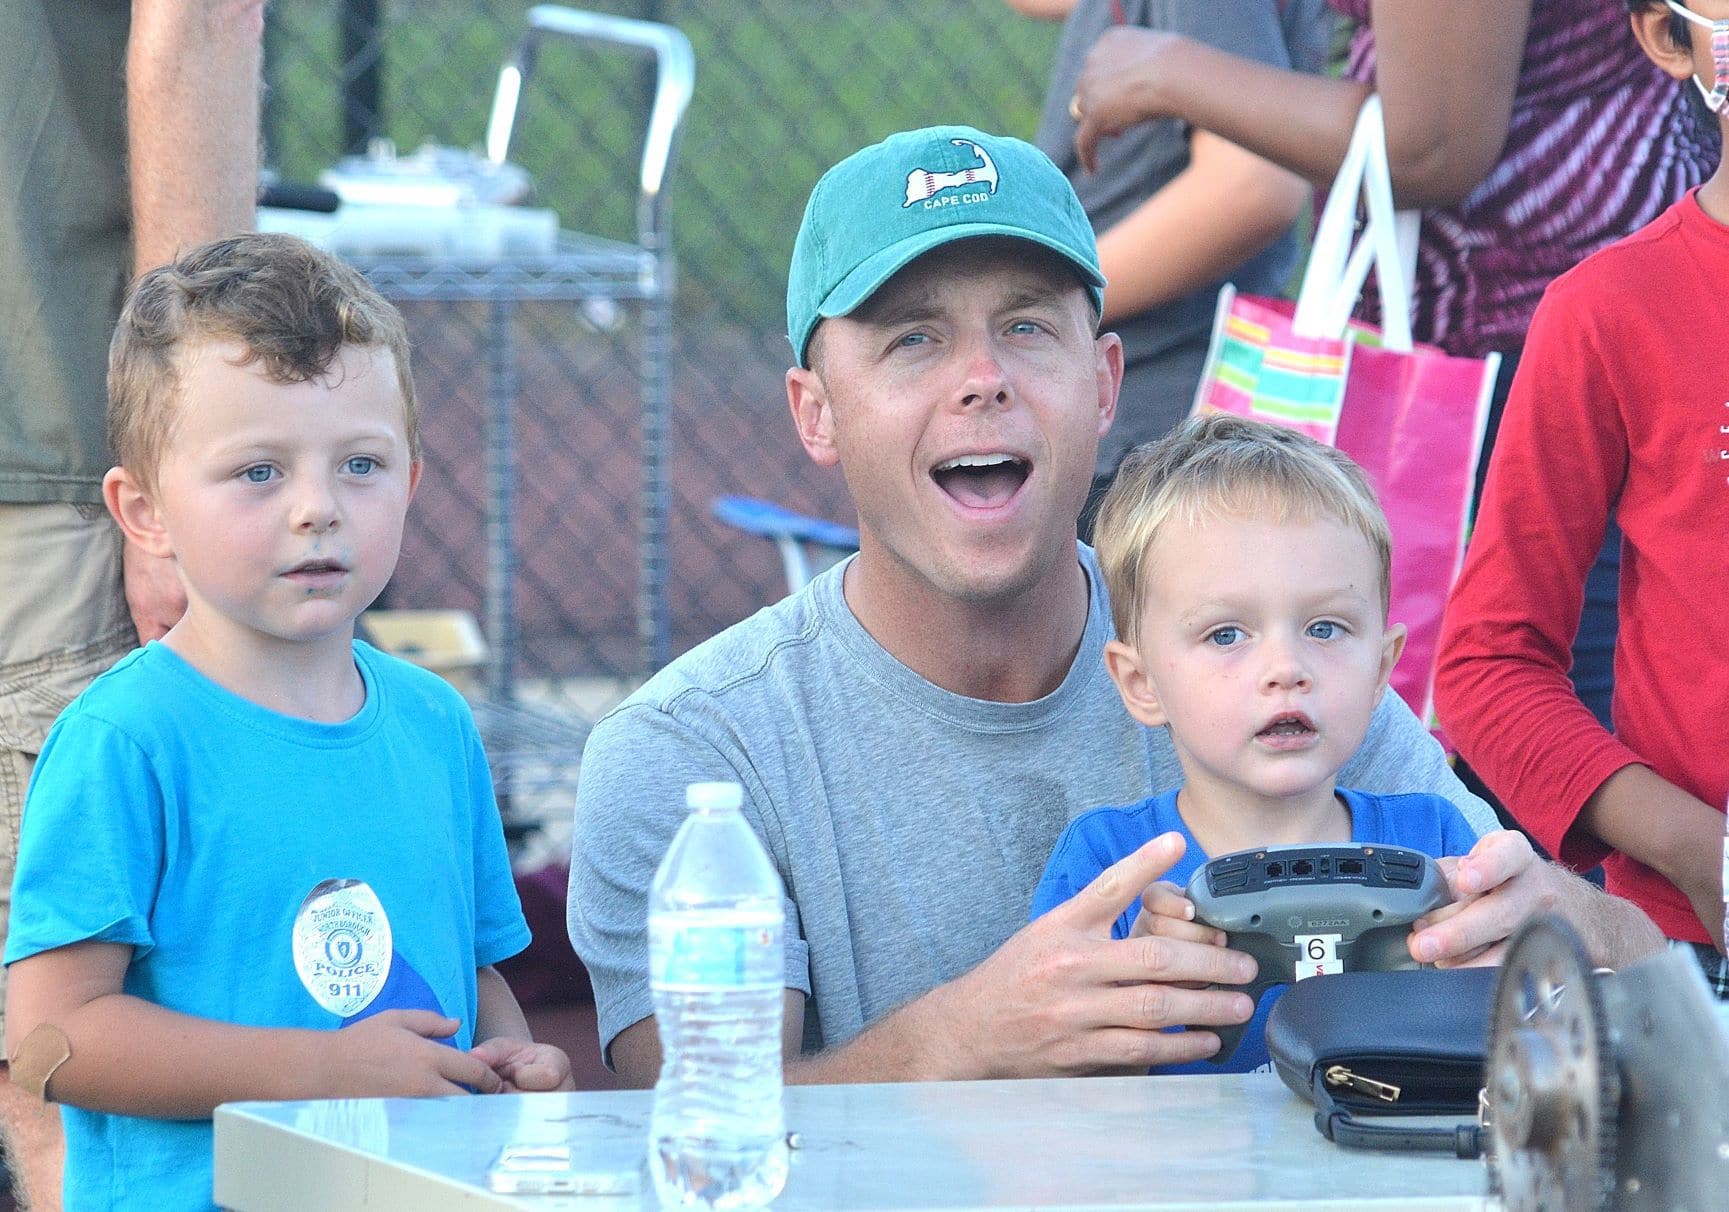 Brian Granger (center) shows his sons (l to r) Brady, 5, and Bennett, 3, how to hit a target with a Frisbee at an interactive robotics demo provided by Algonquin’s Robotics Team.